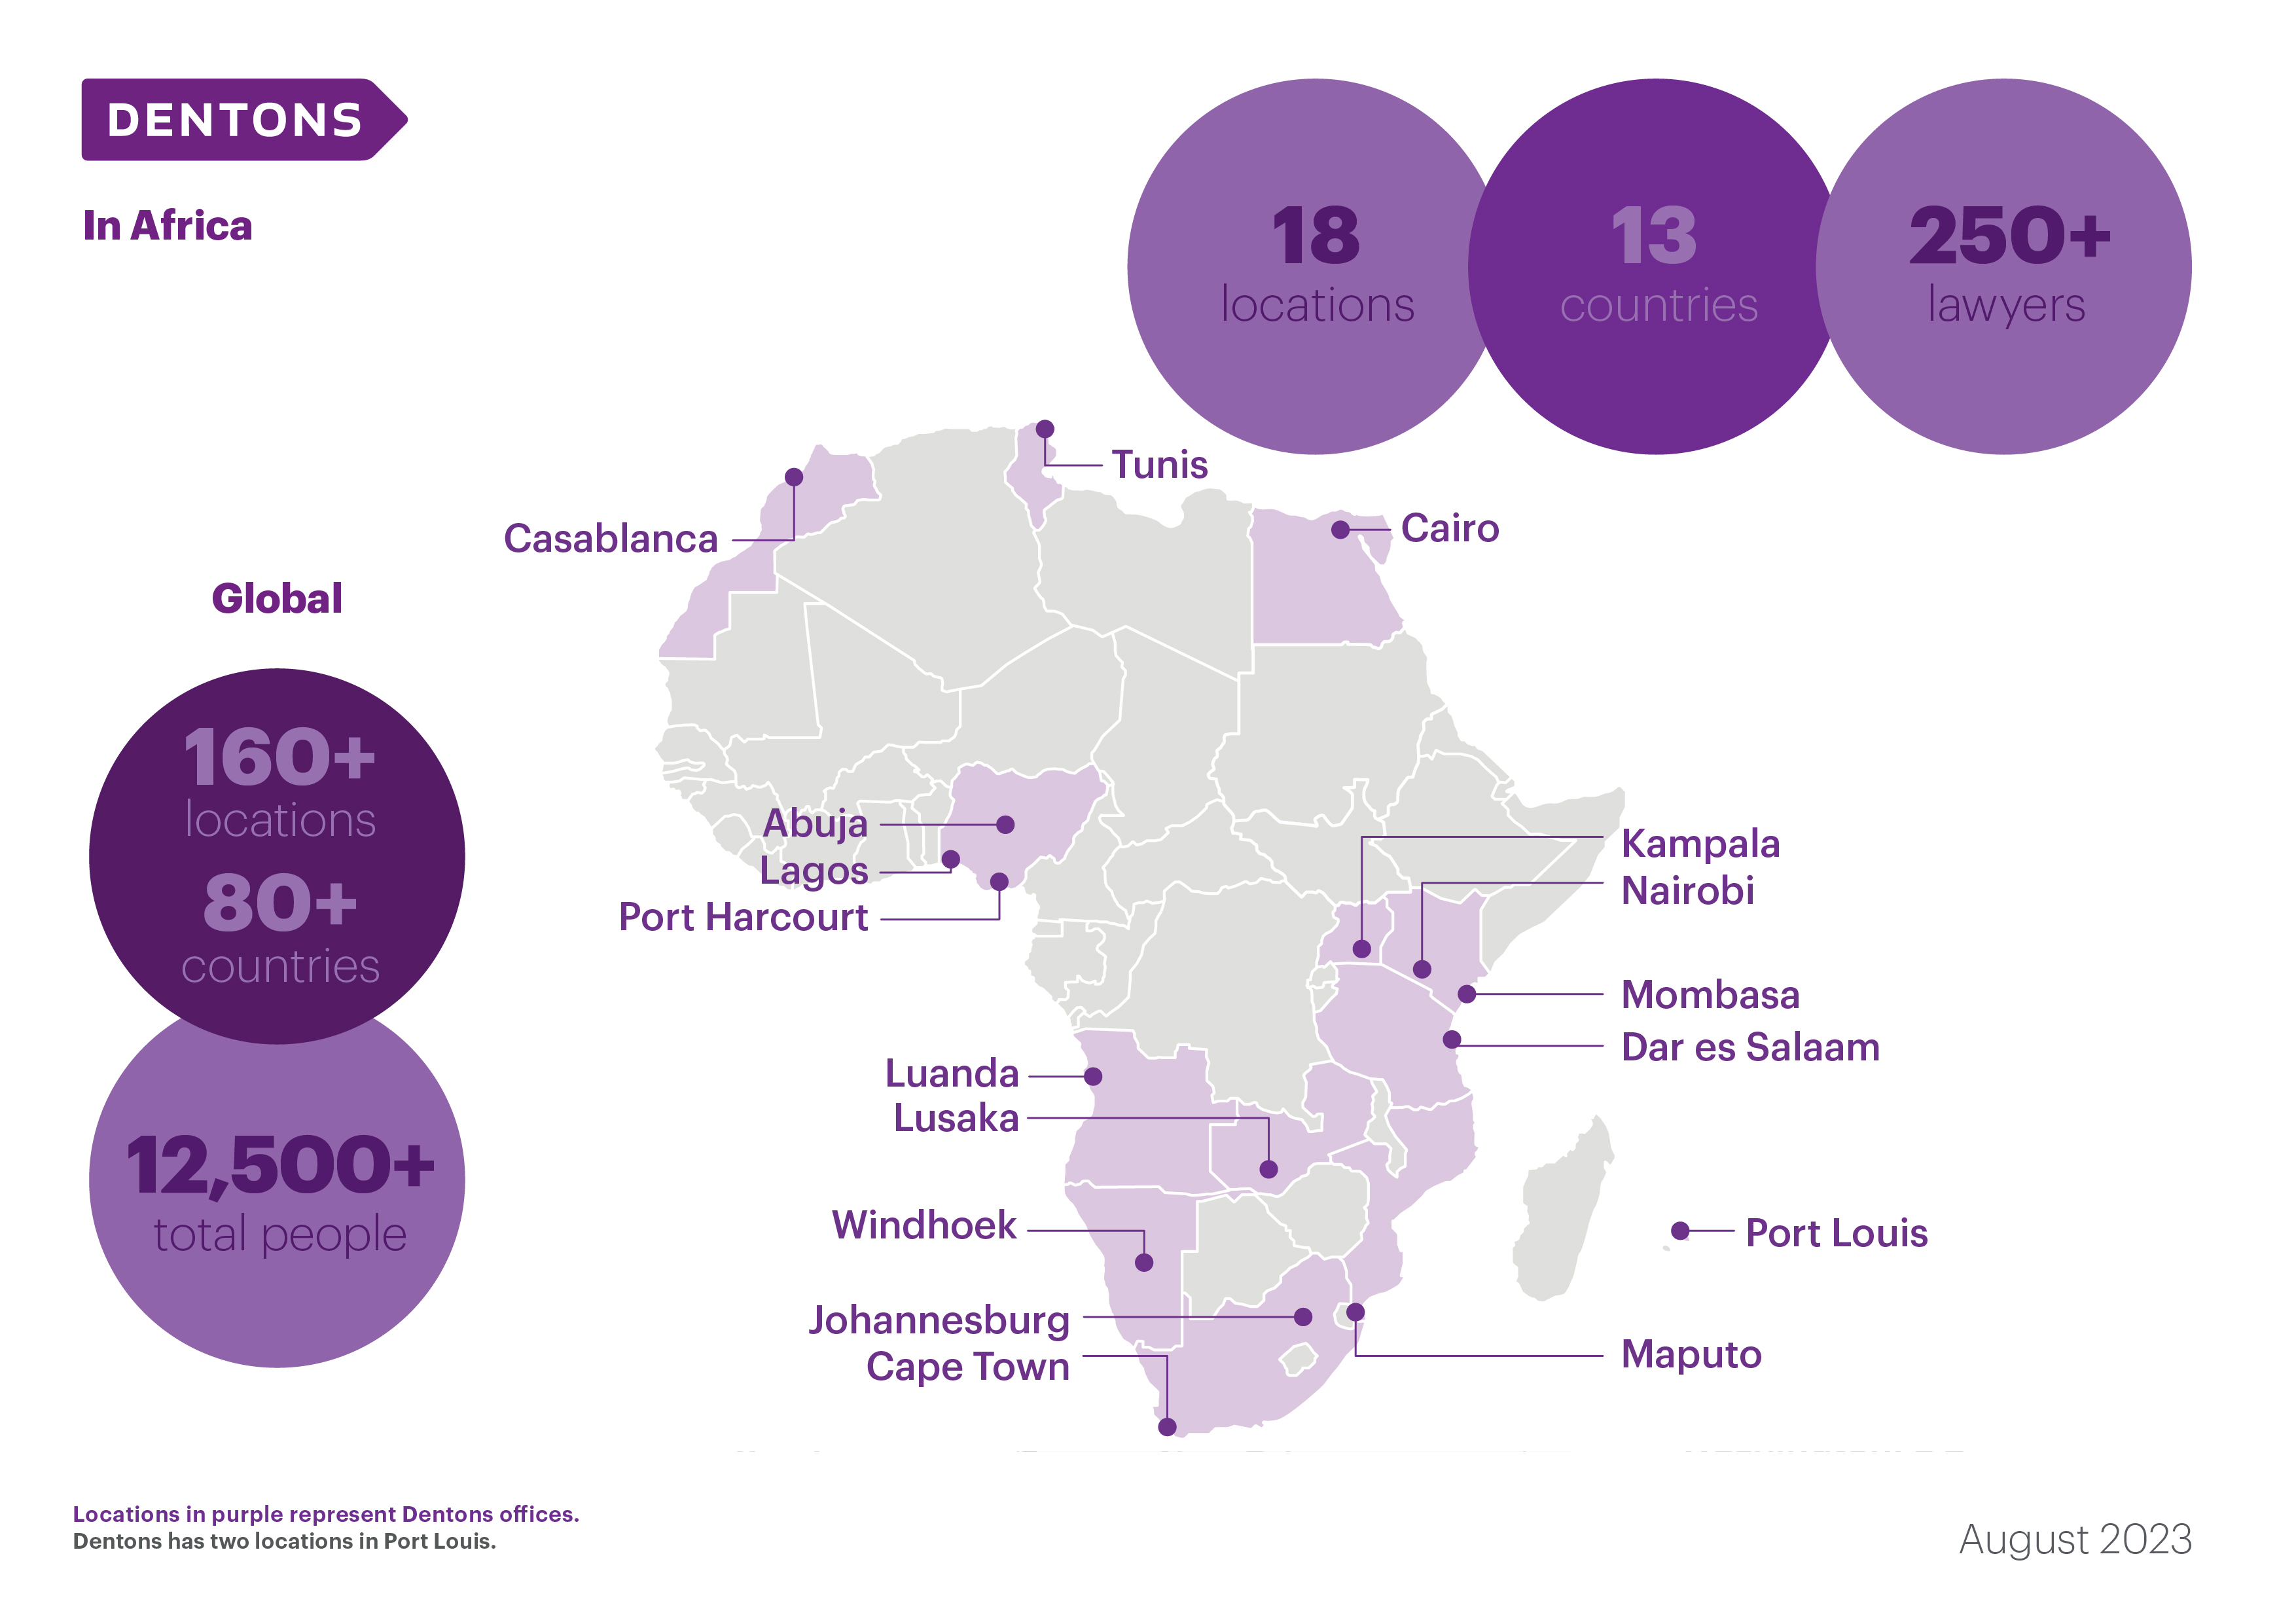 Map showing Dentons' presence in Africa